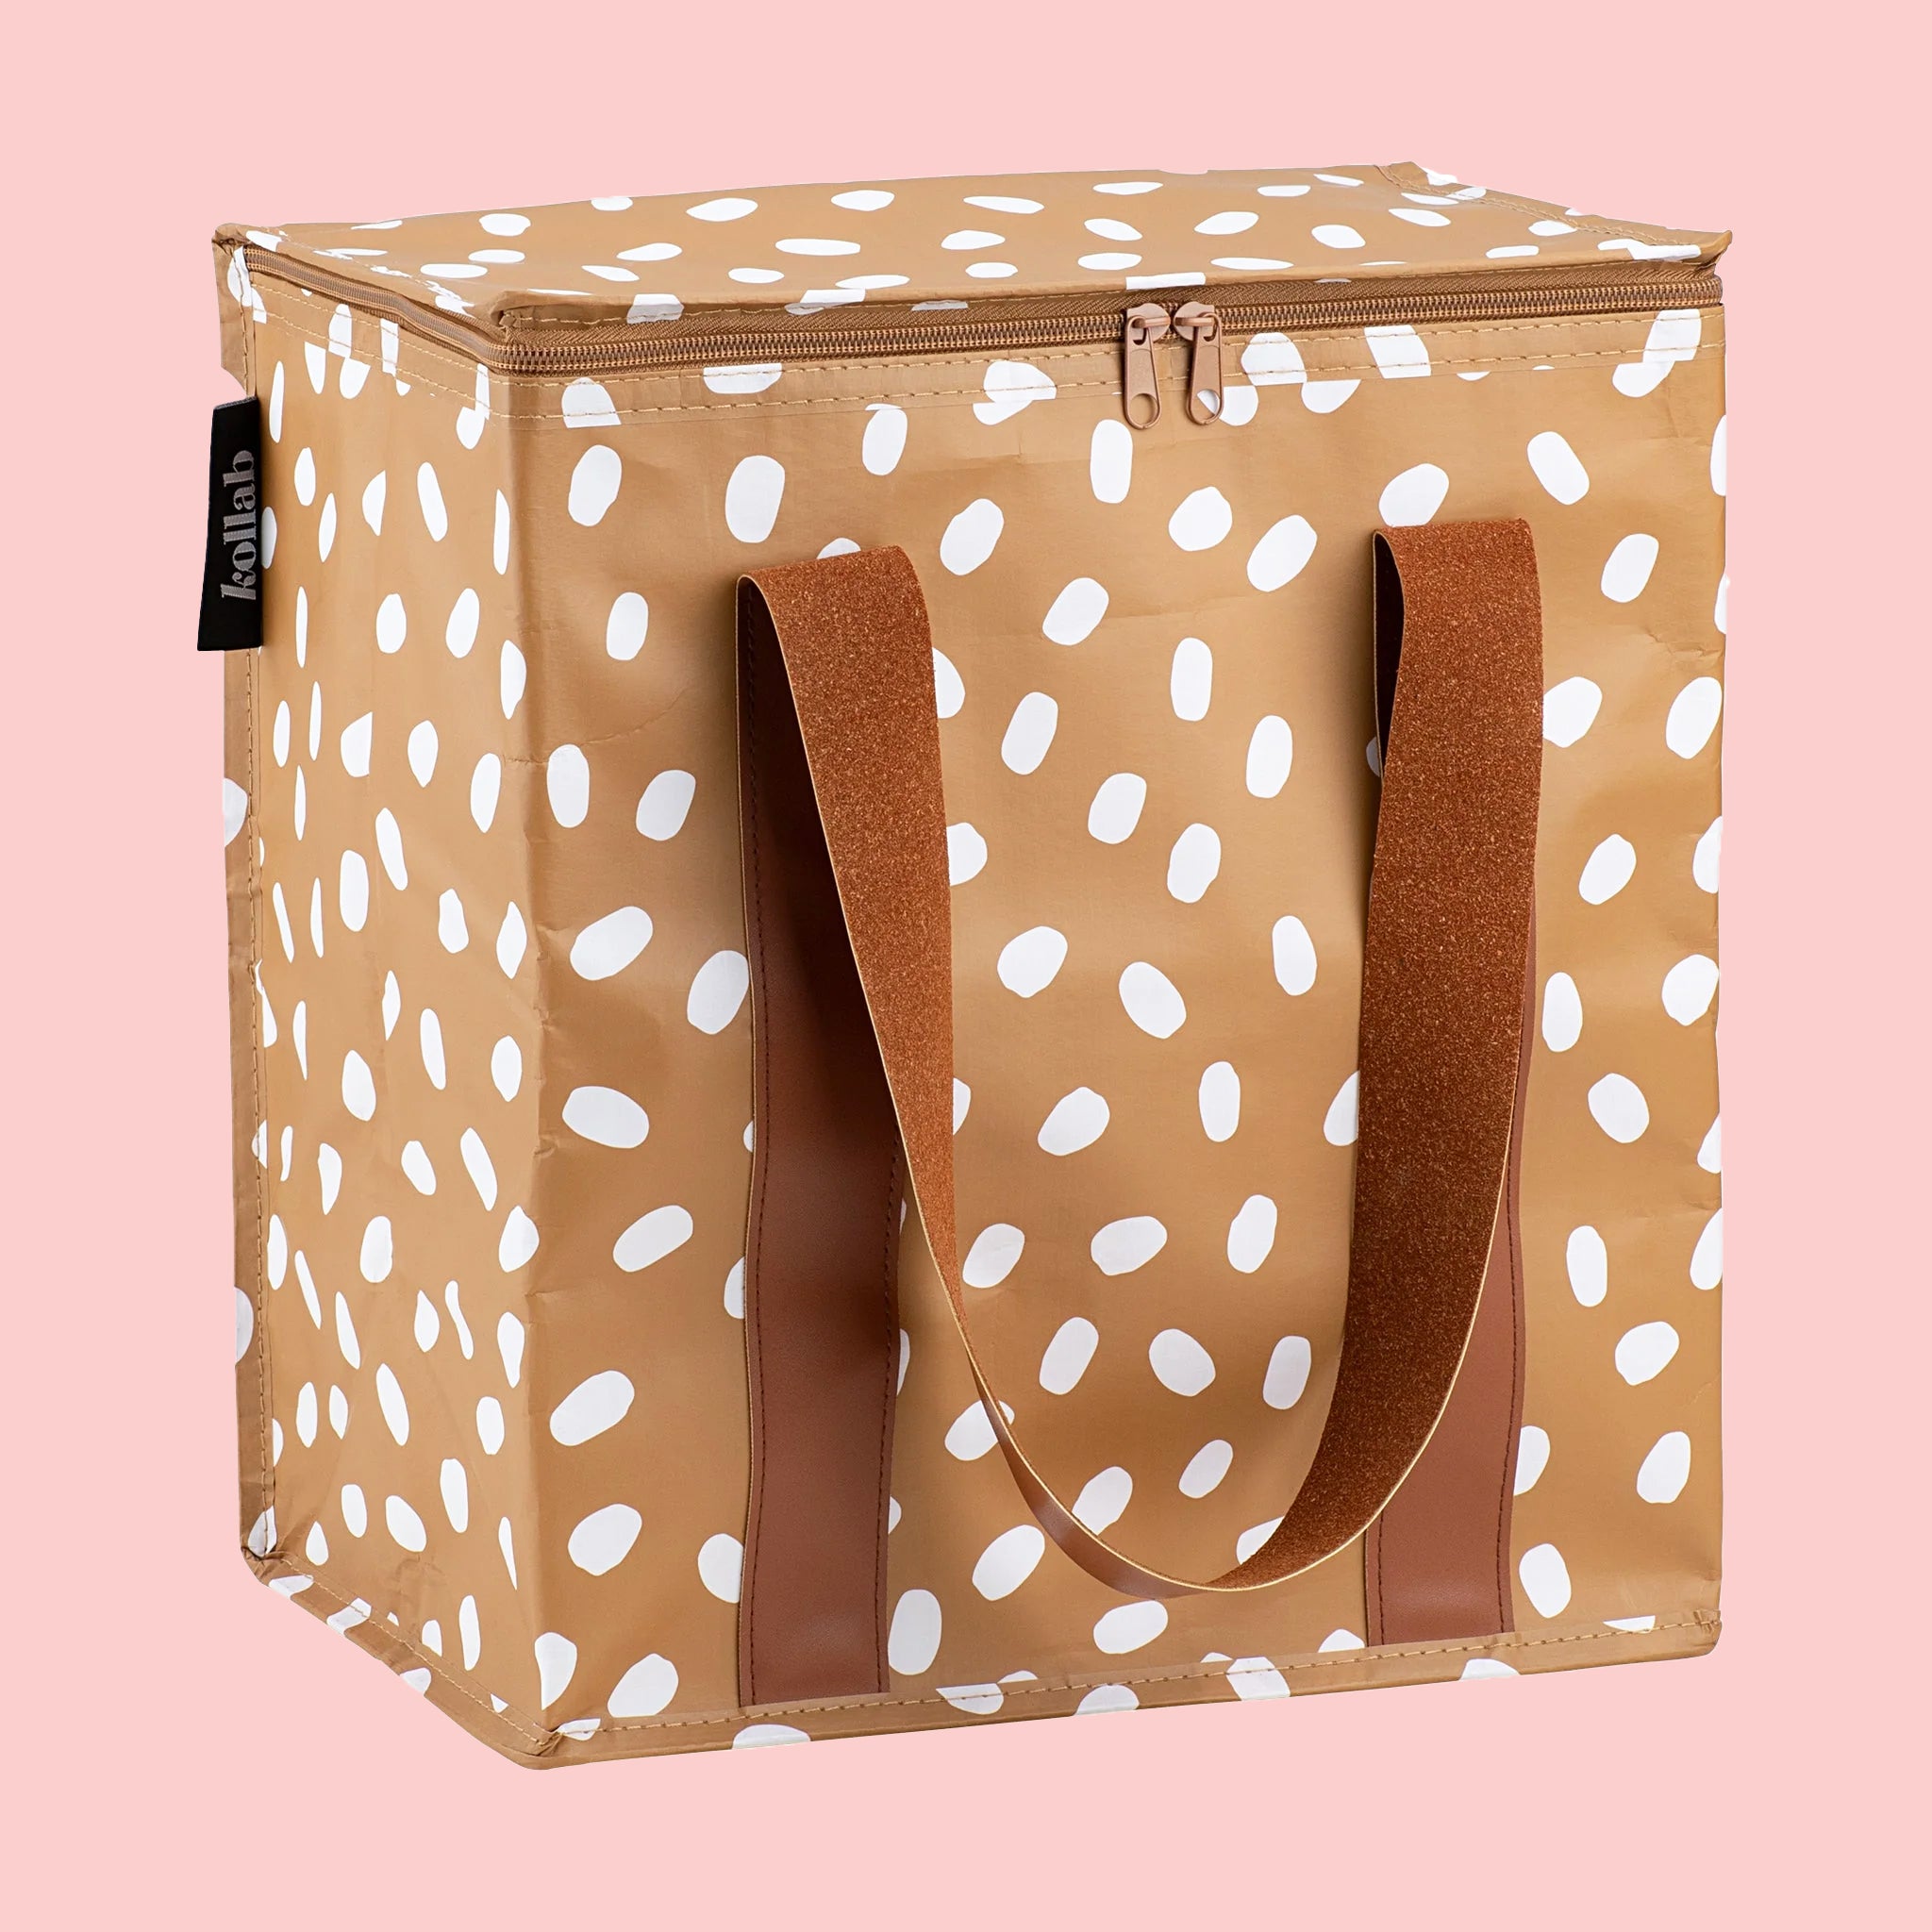 On a pink background is a brown cooler bag with white spots and a darker brown strap. 